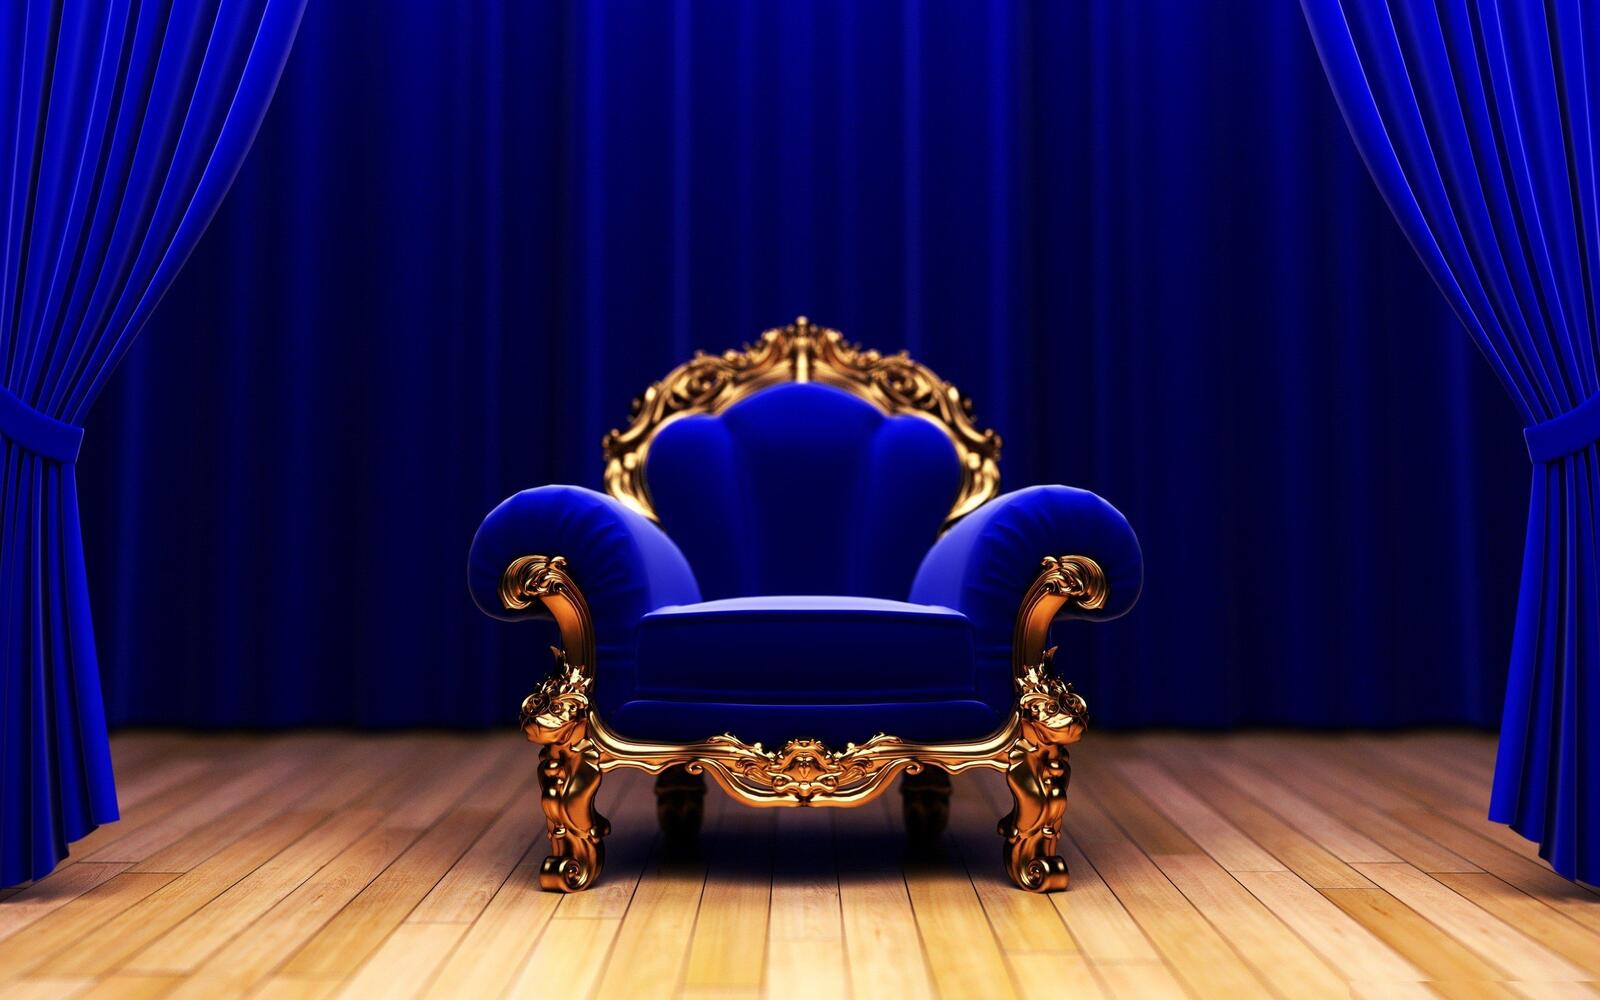 Wallpapers armchair blue chair king on the desktop